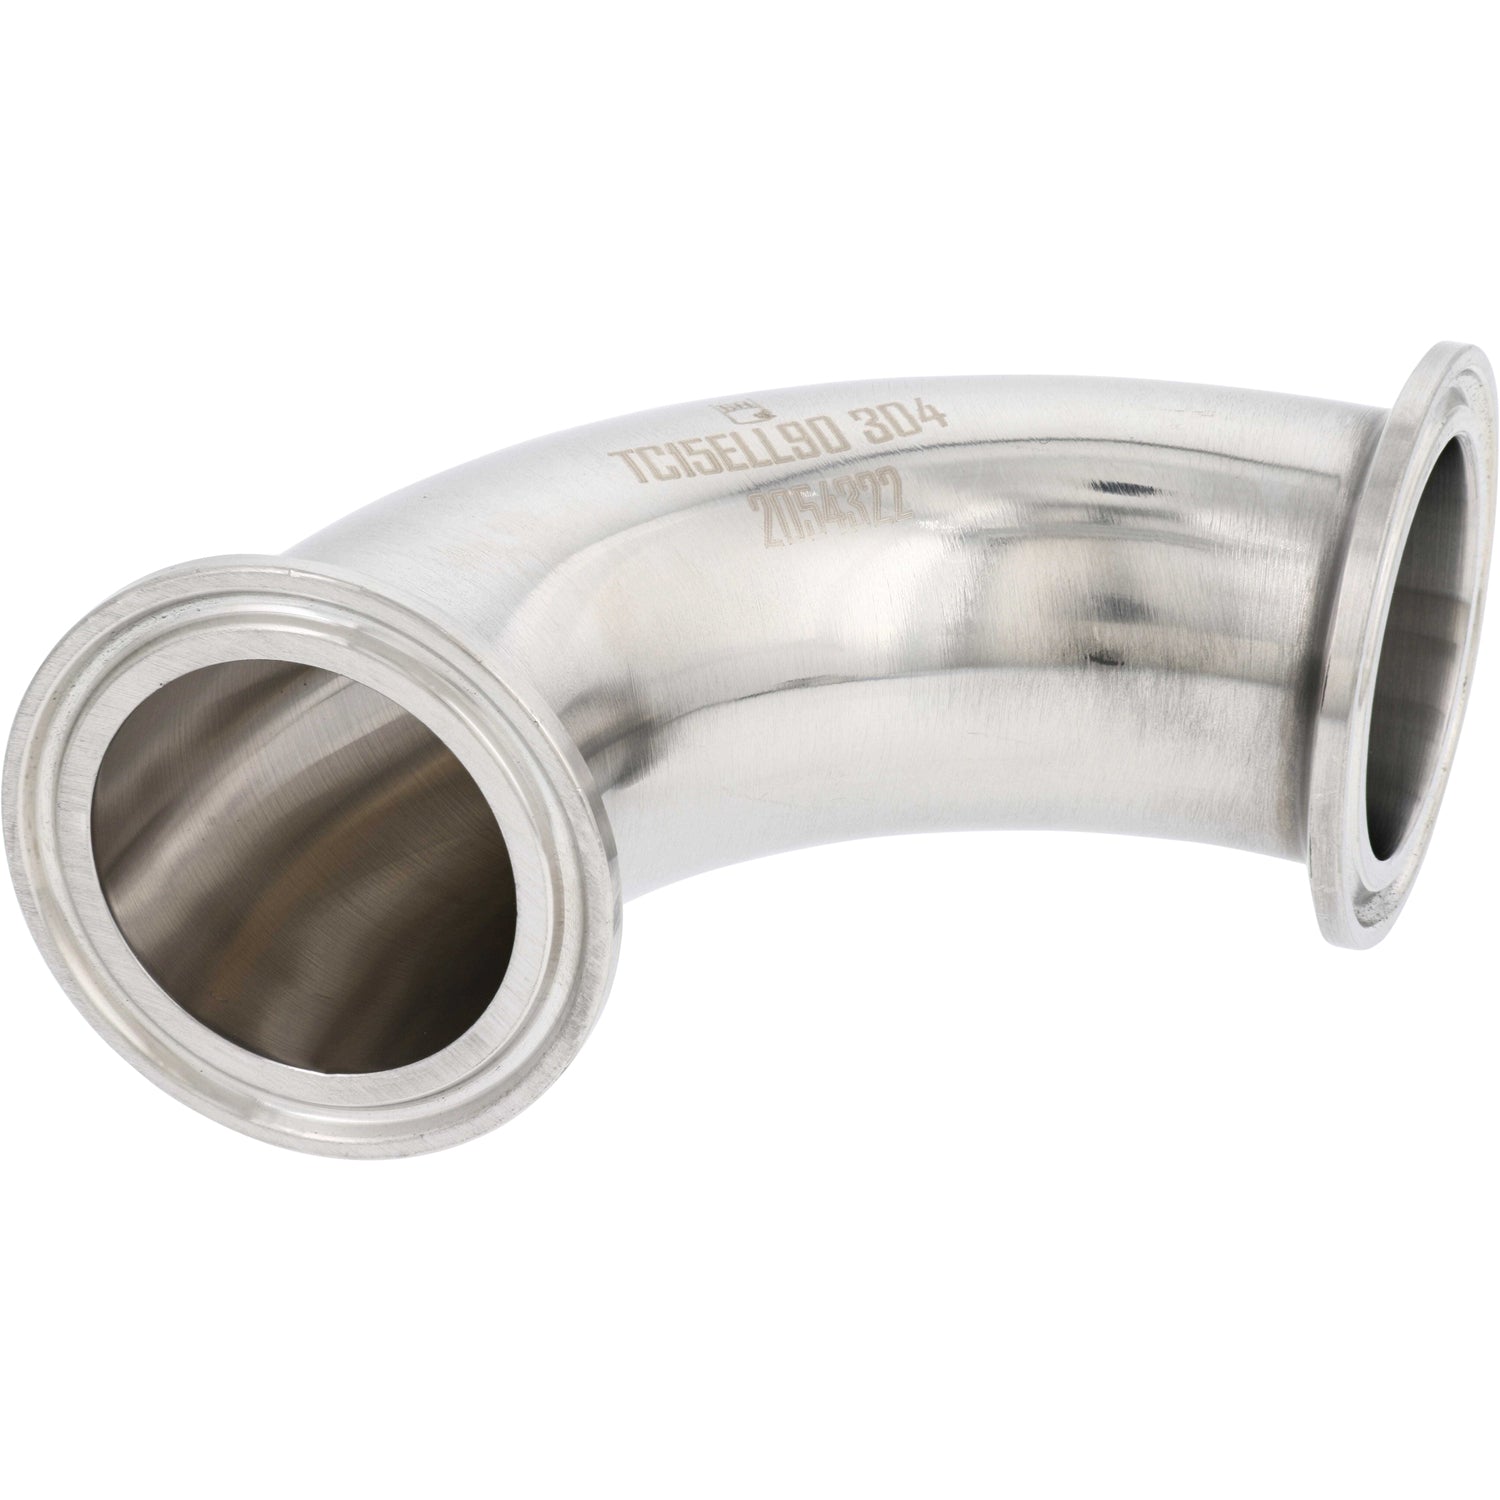 Polished stainless steel 90 degree elbow fitting with 1.5" tri clamp compatible ends shown on white background.